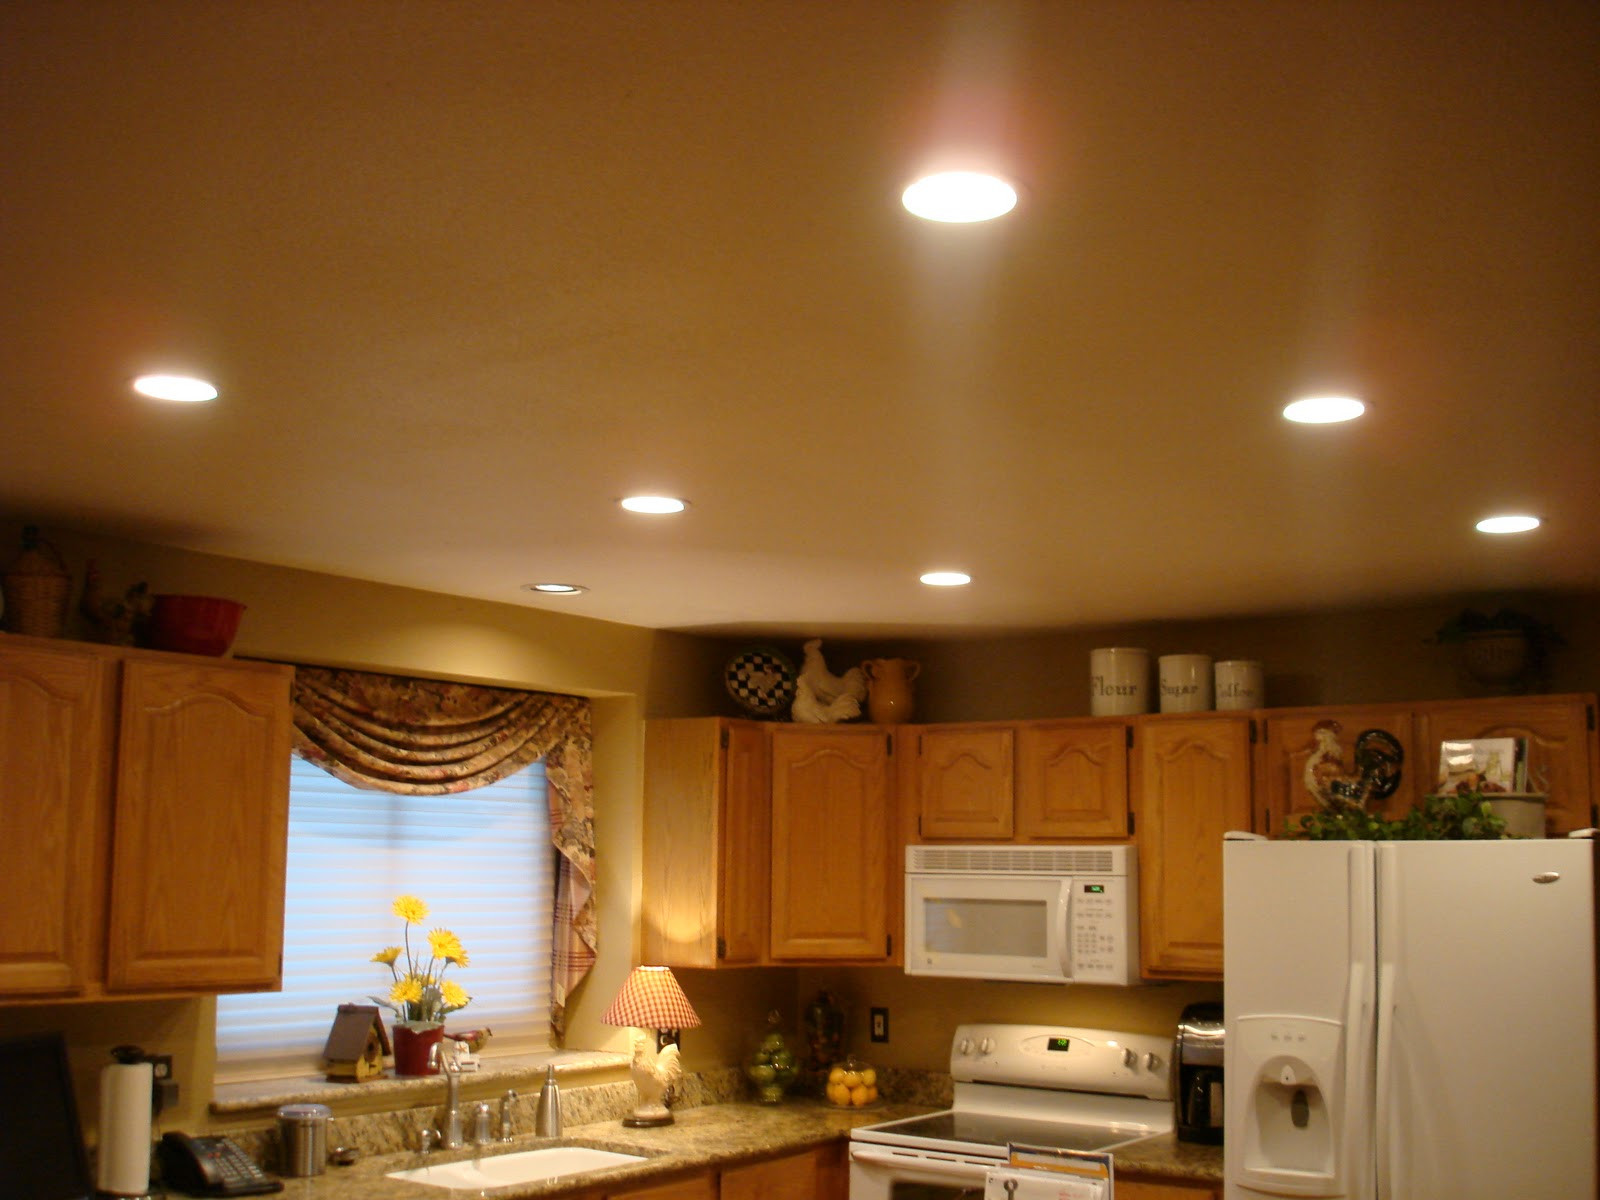 Kitchen Lights Ceiling
 Kitchen Ceiling Lights Ideas to Enlighten Cooking Times